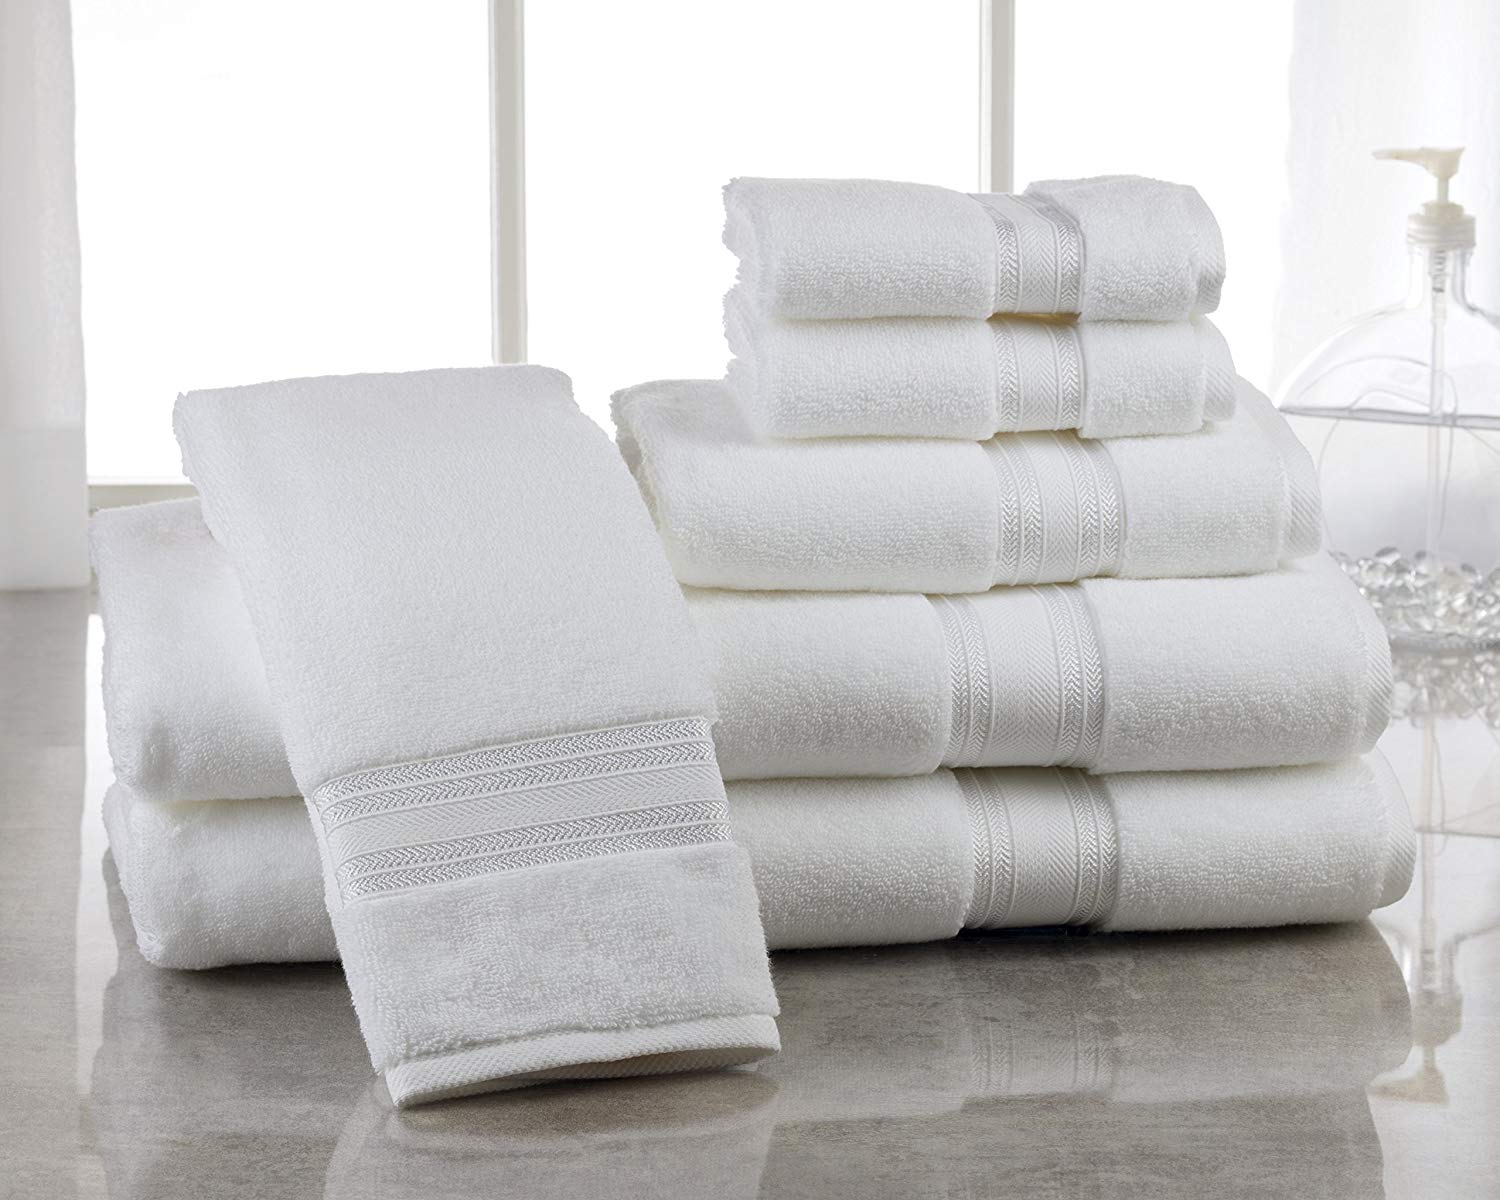 Today only: 6-piece 100% Turkish cotton 700GSM towel set for $28